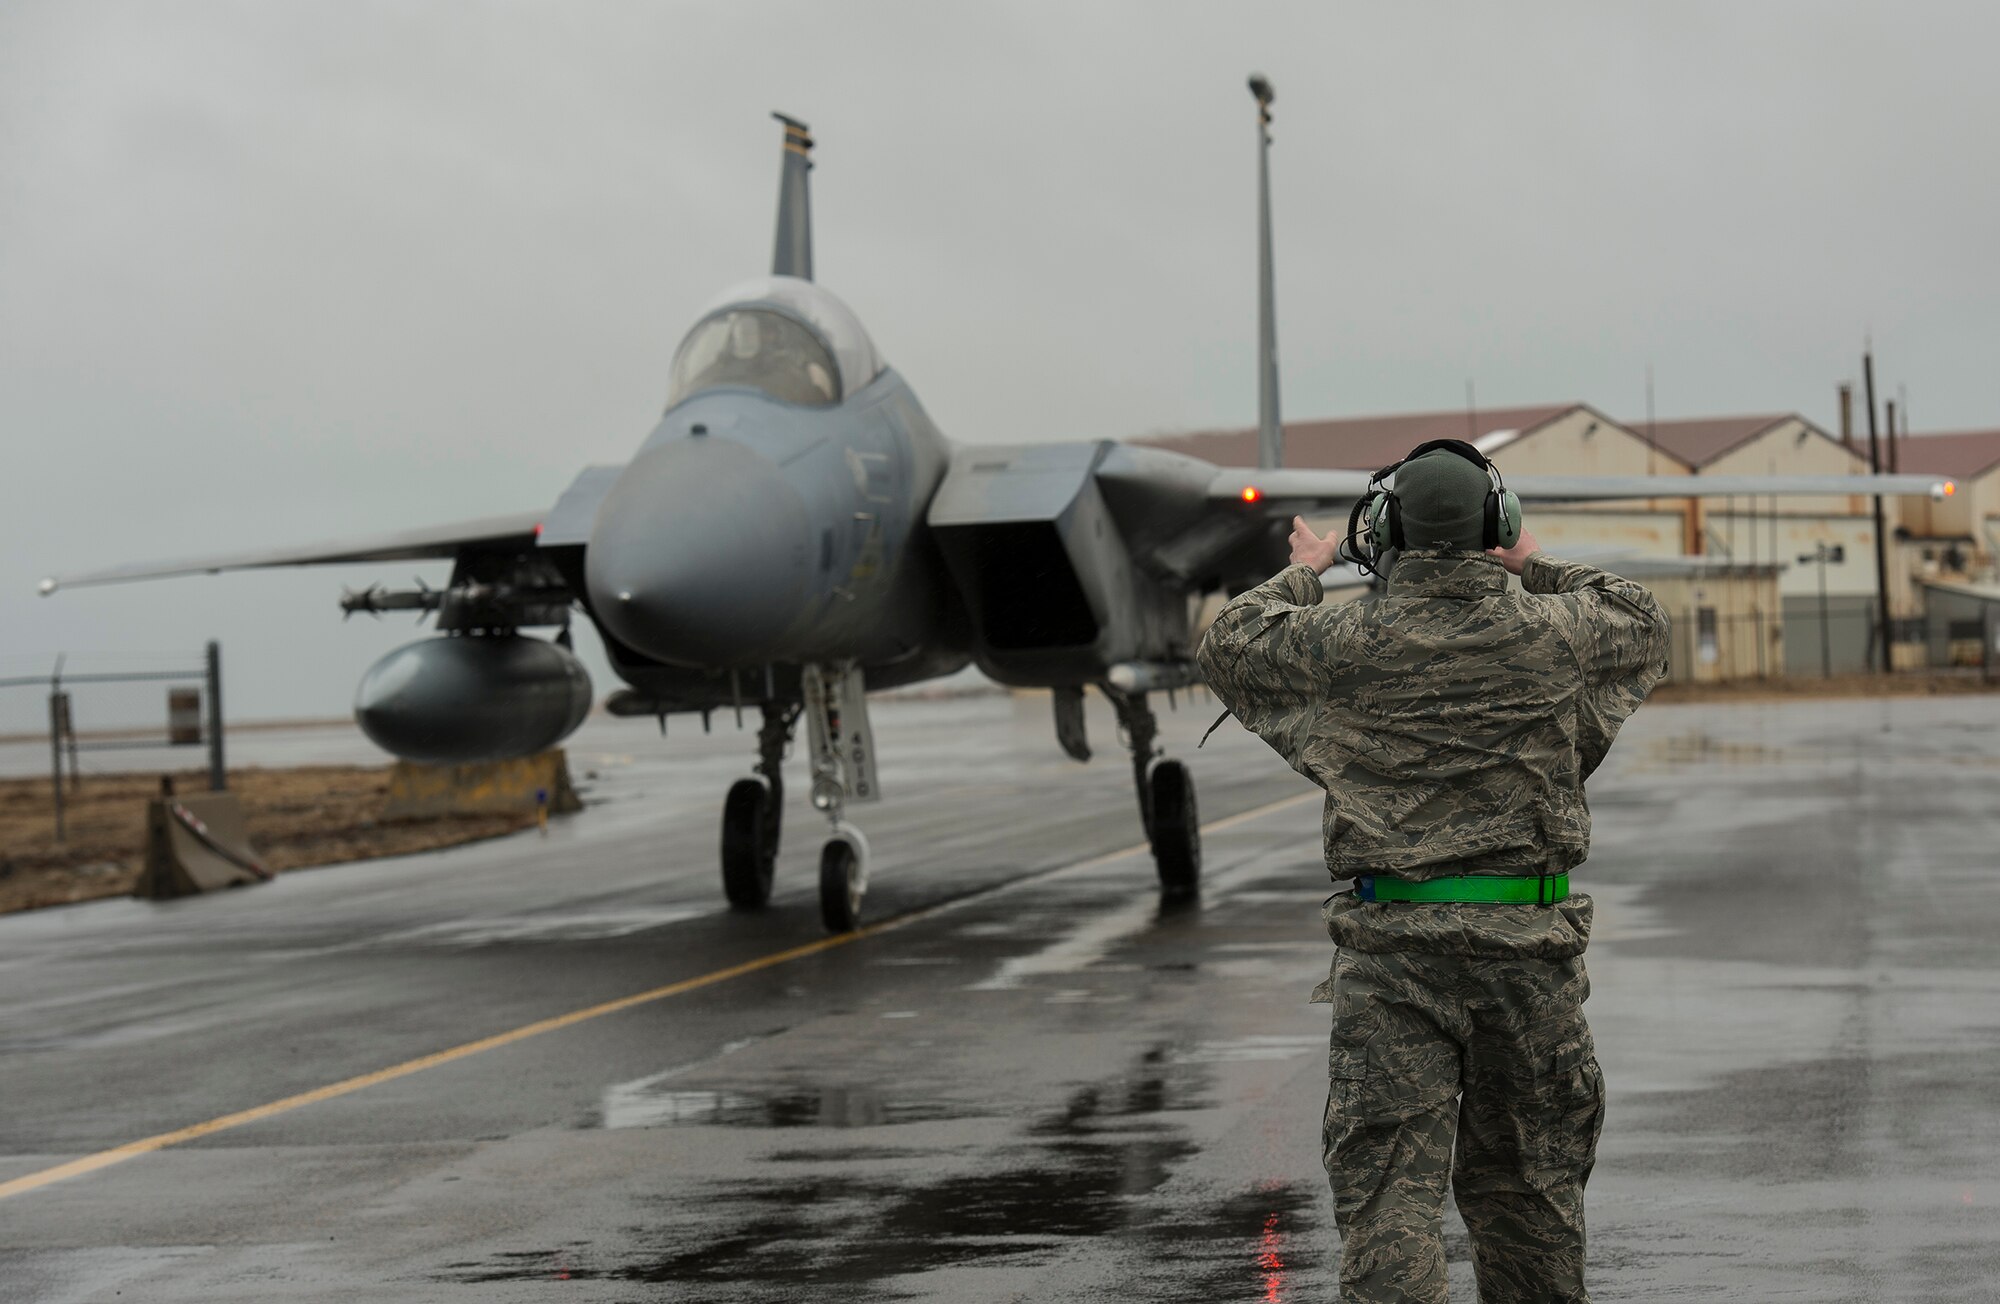 An F-15C Eagle fighter aircraft with the 871st Air Expeditionary Squadron arrives at Keflavik International Airport, Iceland in support of Icelandic Air Surveillance and Policing operations April 13, 2015. Approximately 200 U.S. Airmen are deployed to Iceland for IAS, an annual NATO mission designed to ensure the safety and security of Icelandic airspace. (U.S. Air Force photo by Staff Sgt. Chad Warren/Released)